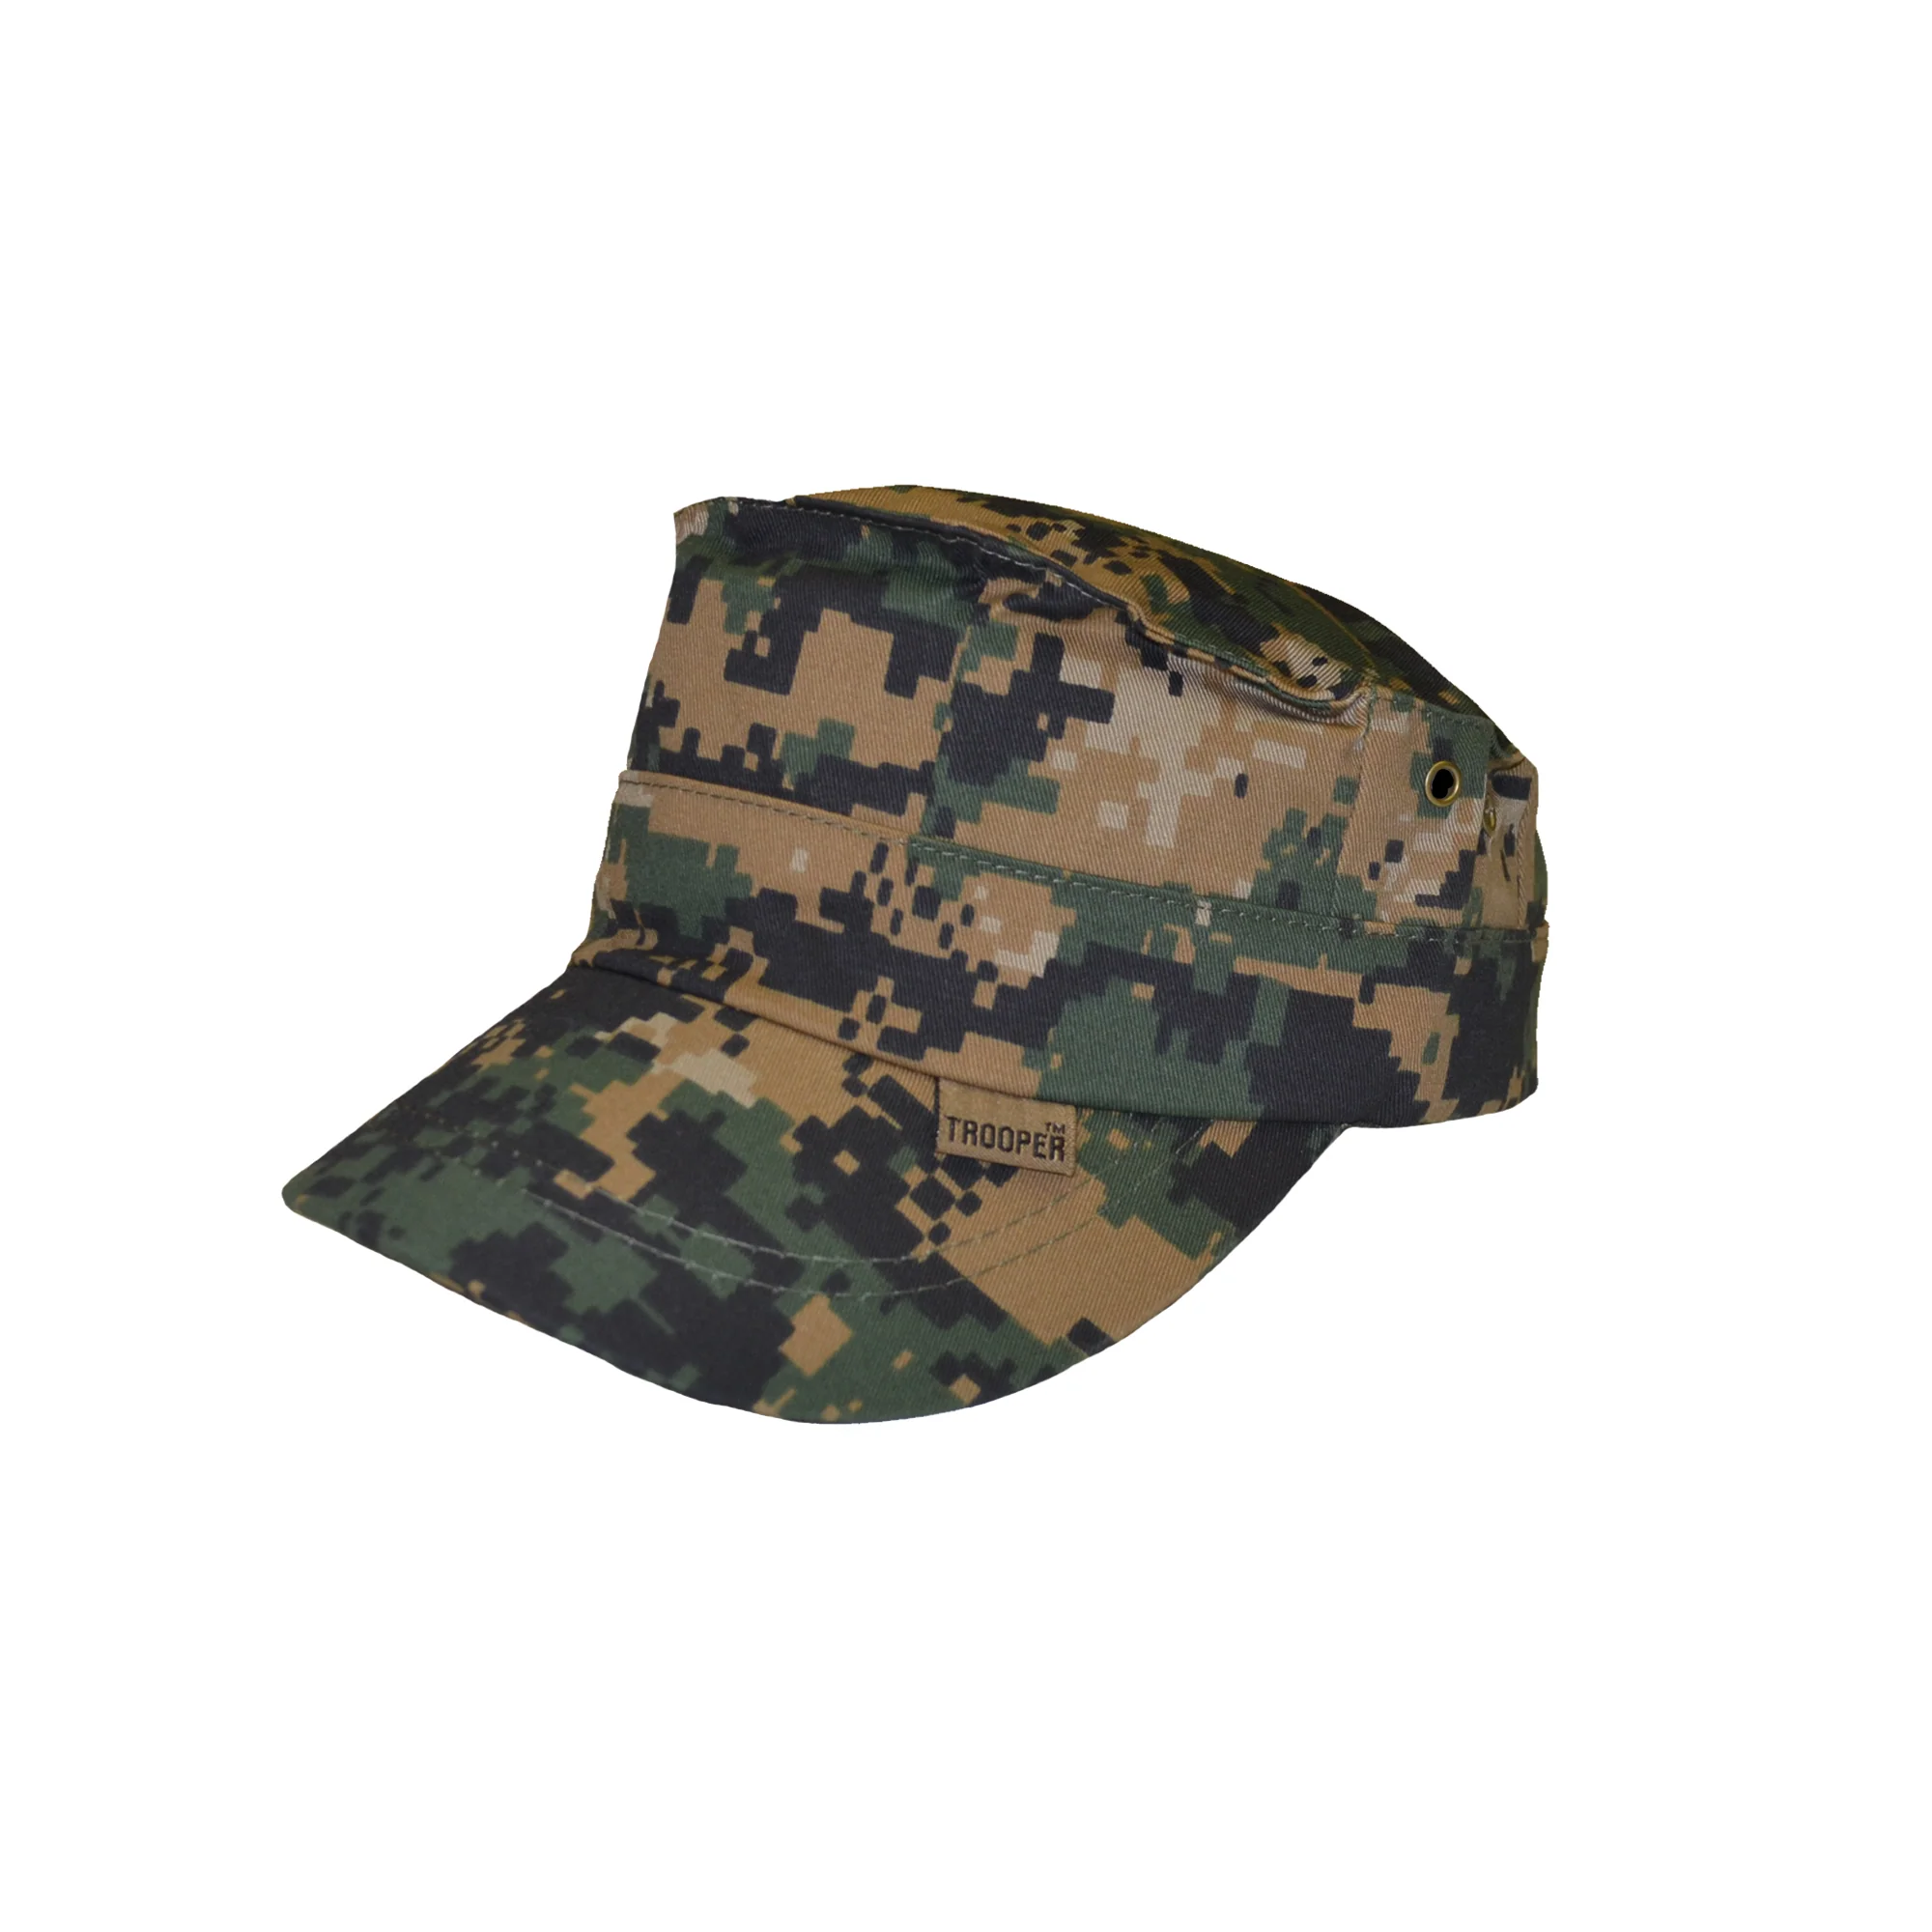 USMC Youth Trooper MARPAT 8 Point Cover Woodland Camo